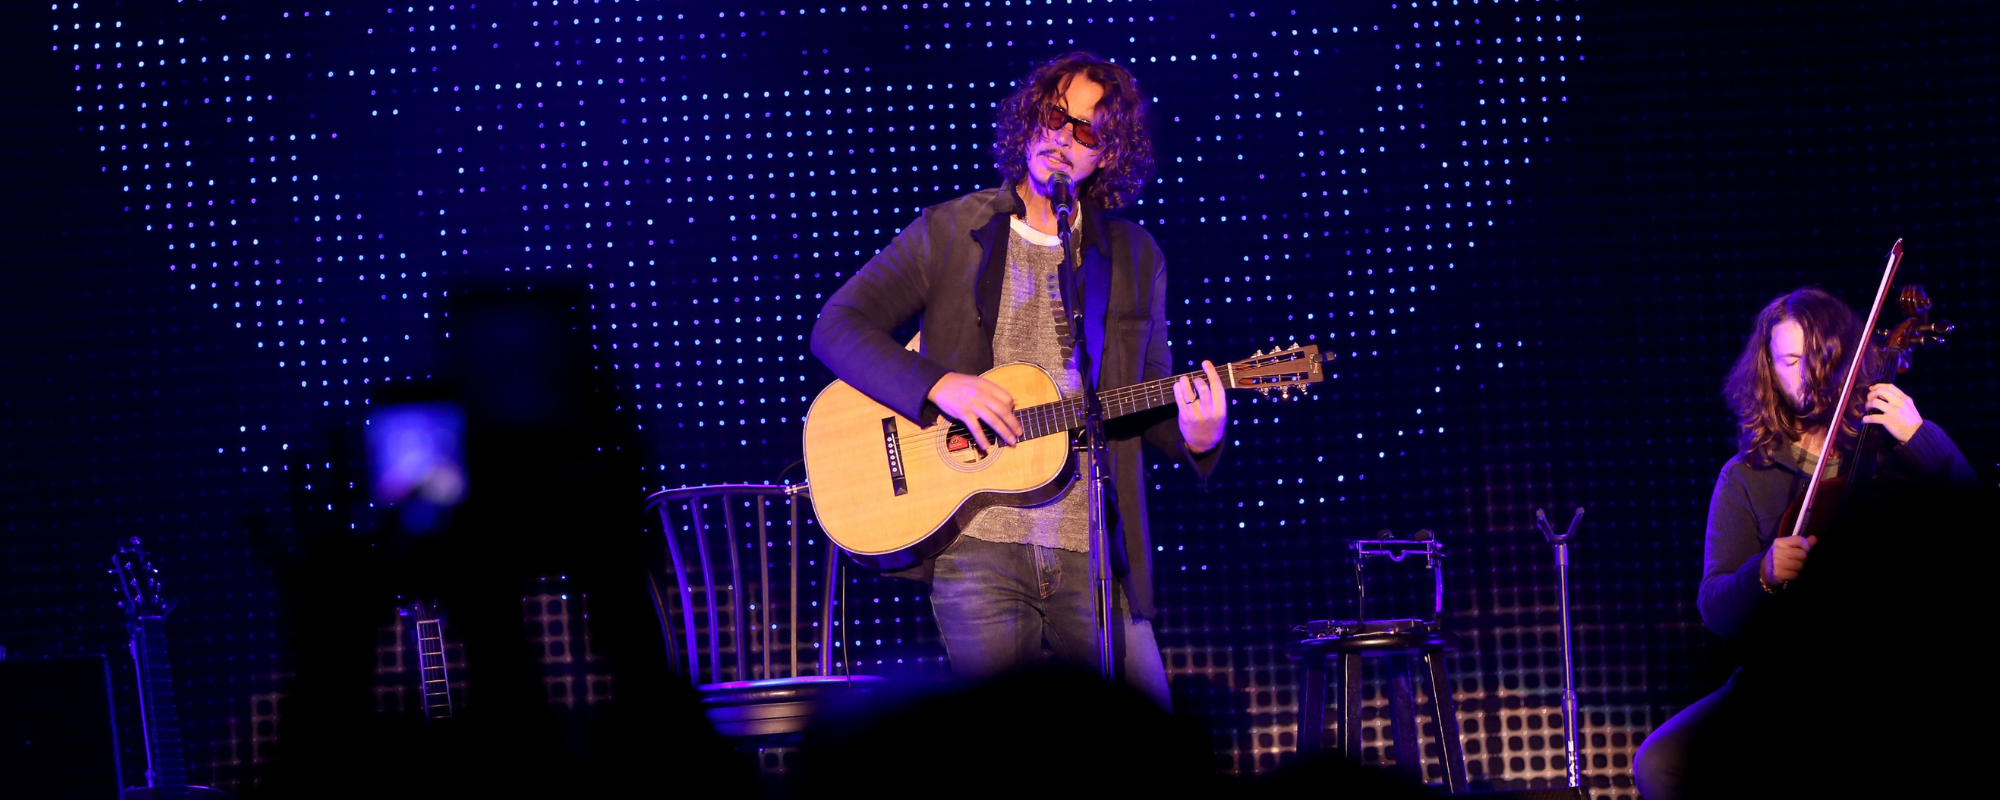 Chris Cornell’s Top 5 Cover Songs